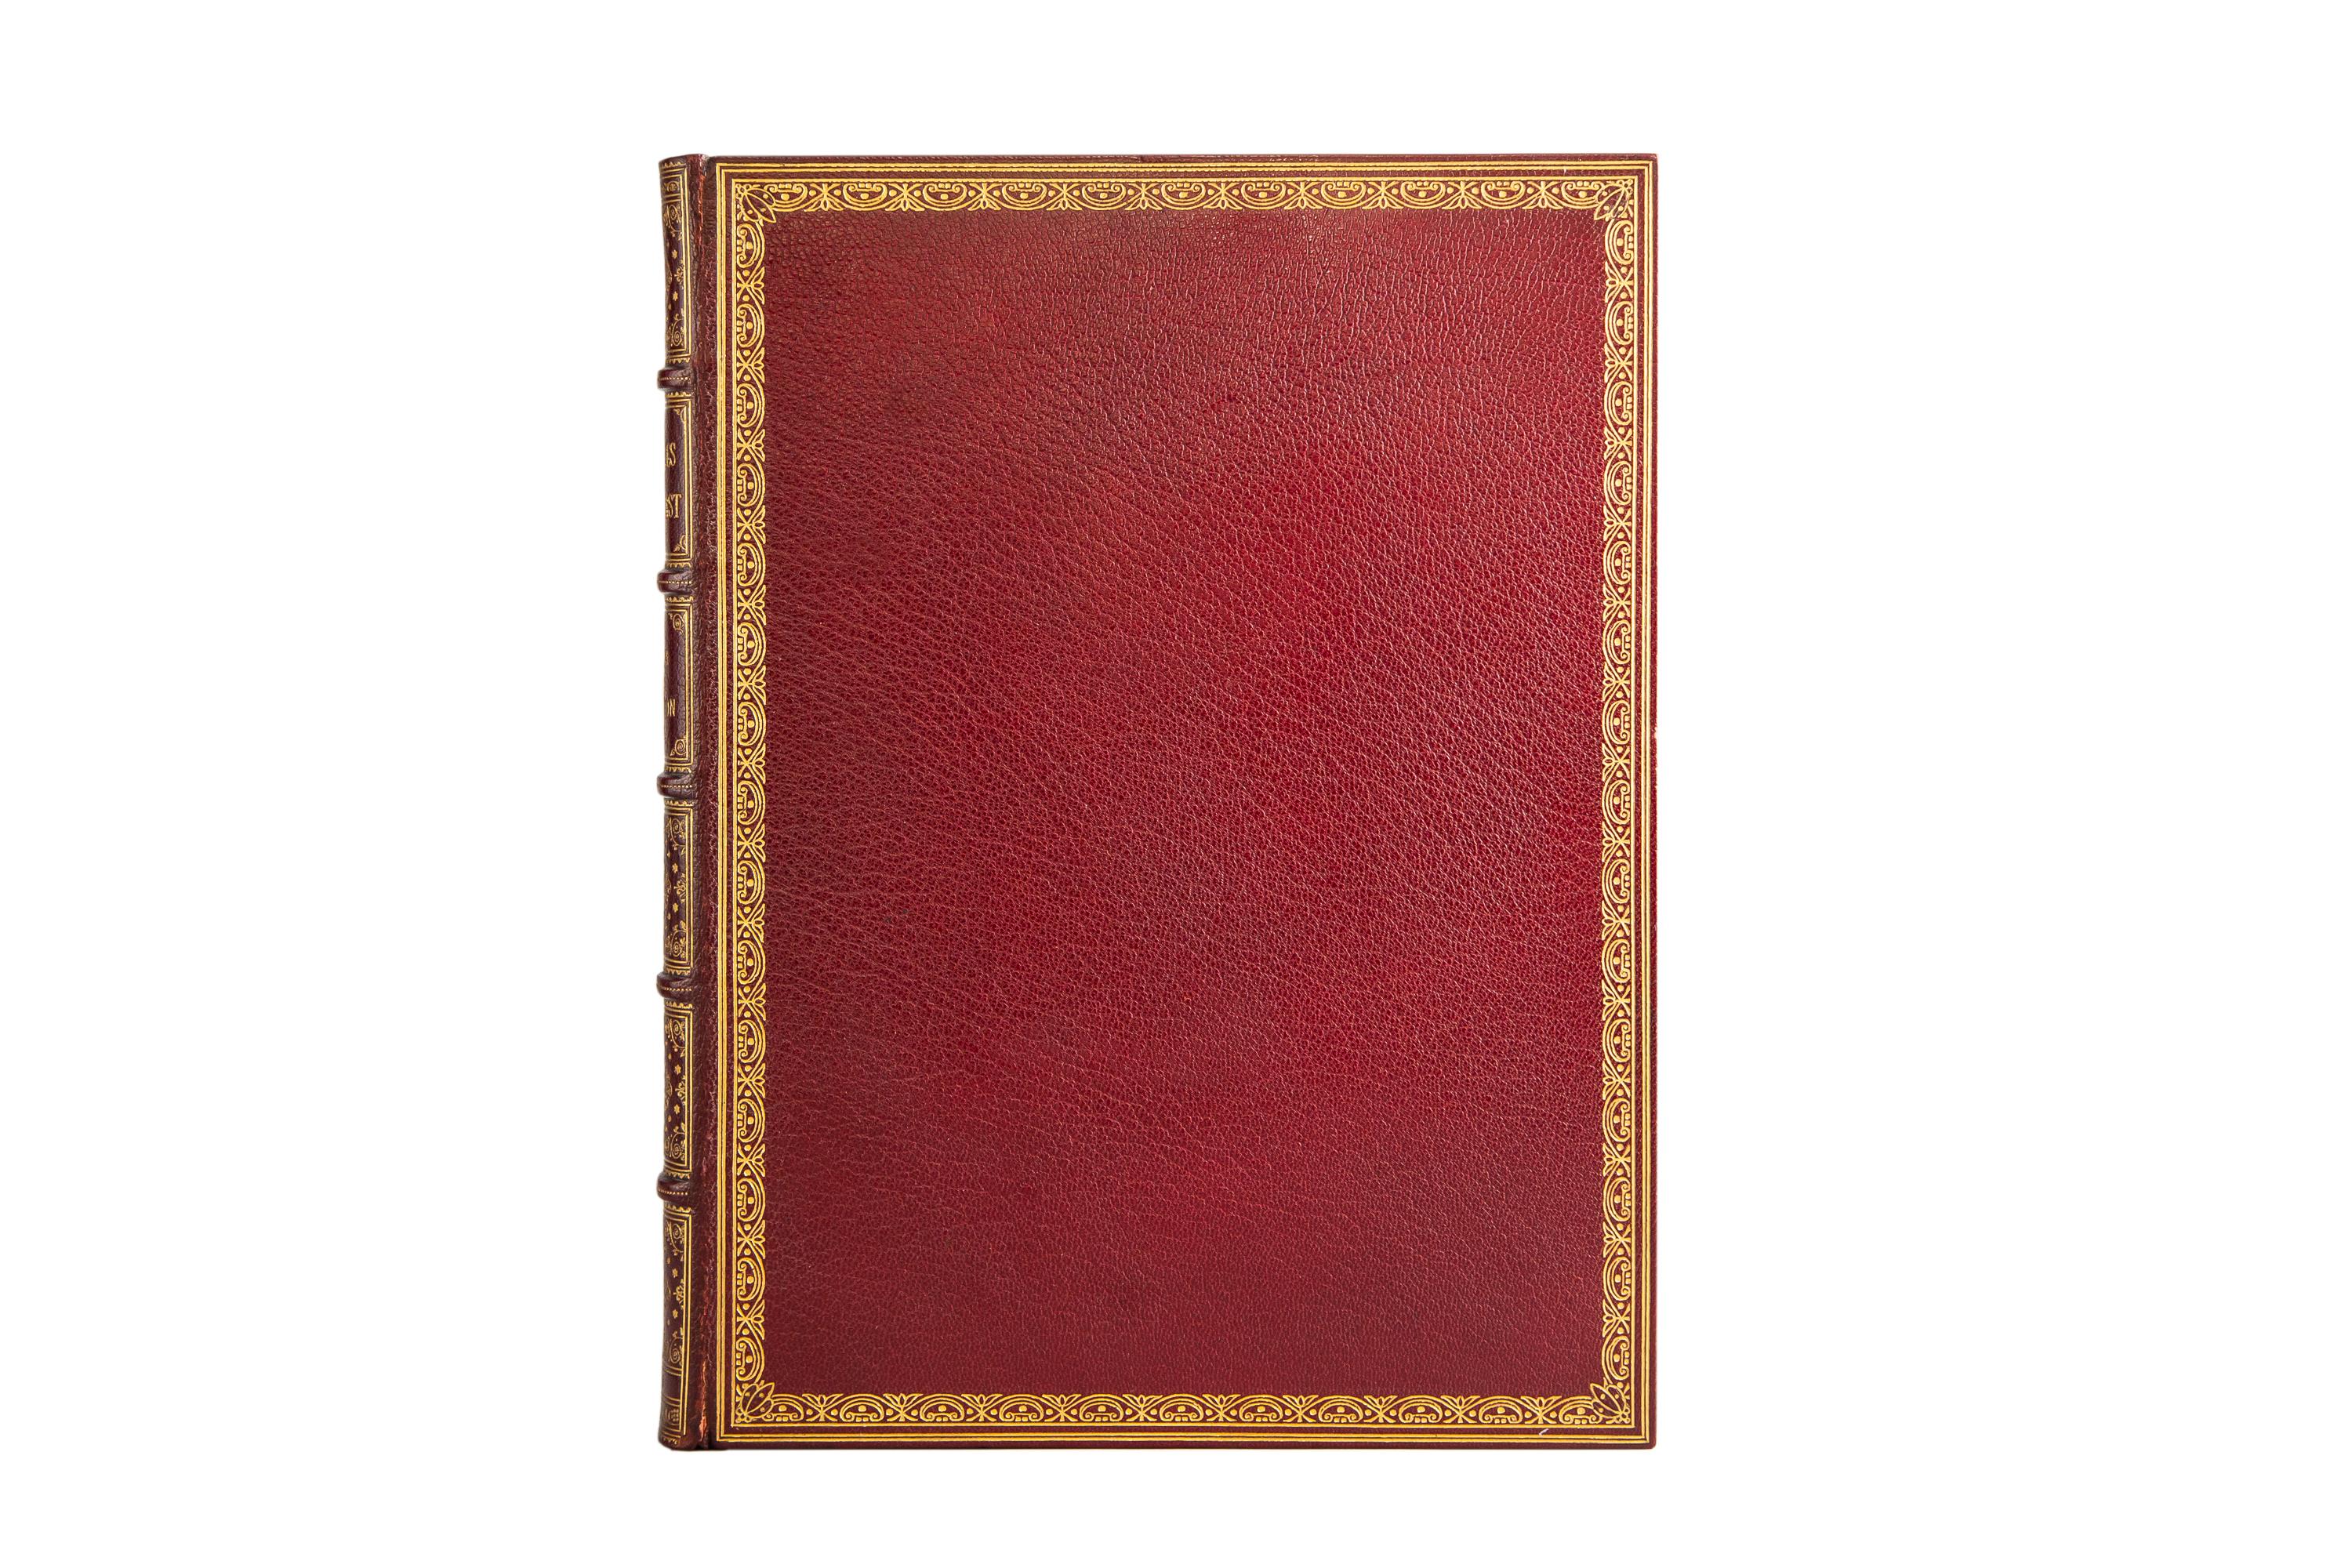 1 Volume. Sir John Skelton. Charles The First. Bound in full red morocco by Riviere & Son, all edges gilt, raised bands, ornate gilt on spines and covers, marbled endpapers, profusely illustrated, hand-colored frontispiece. Published: London &